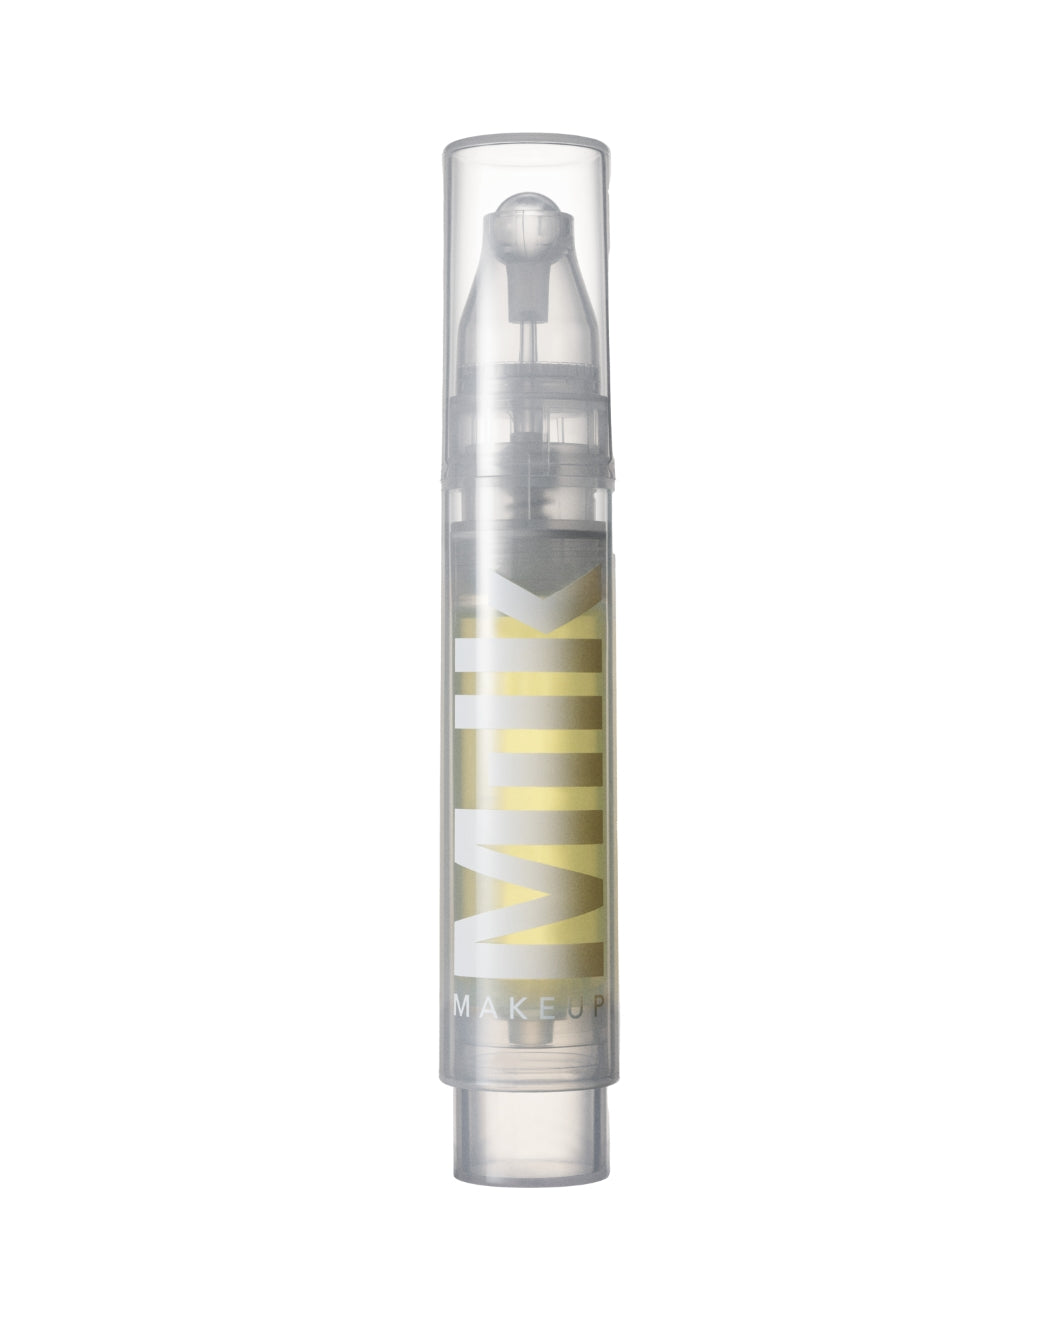 Product image of a tube of Milk Makeup Sunshine Oil on a white background